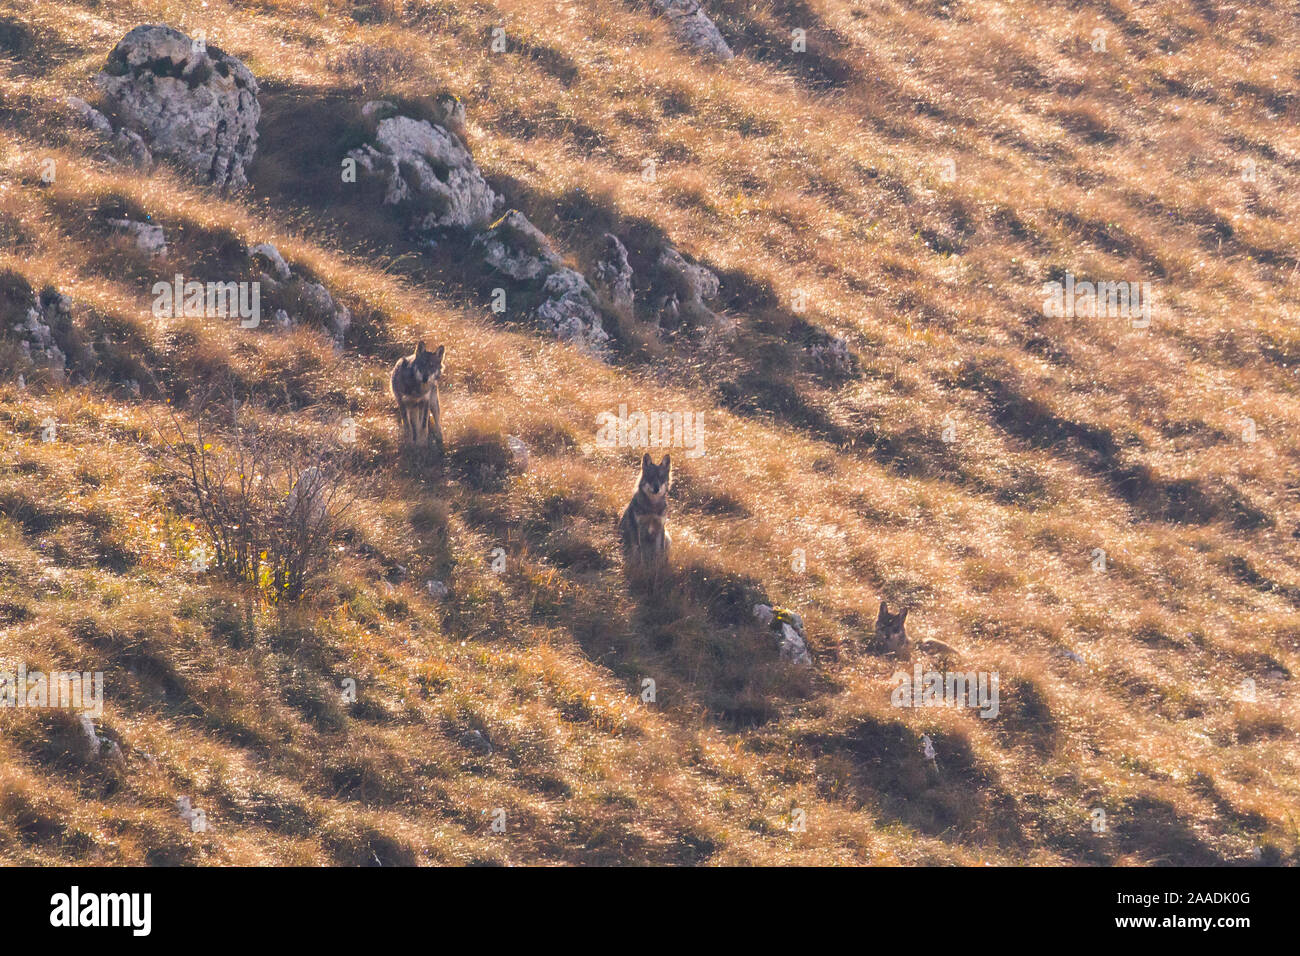 Wild Apennine wolves (Canis lupus italicus) resting among dry grass on a mountain slope in autumn. Central Apennines, Abruzzo, Italy. November. Italy endemic subspecies. Stock Photo